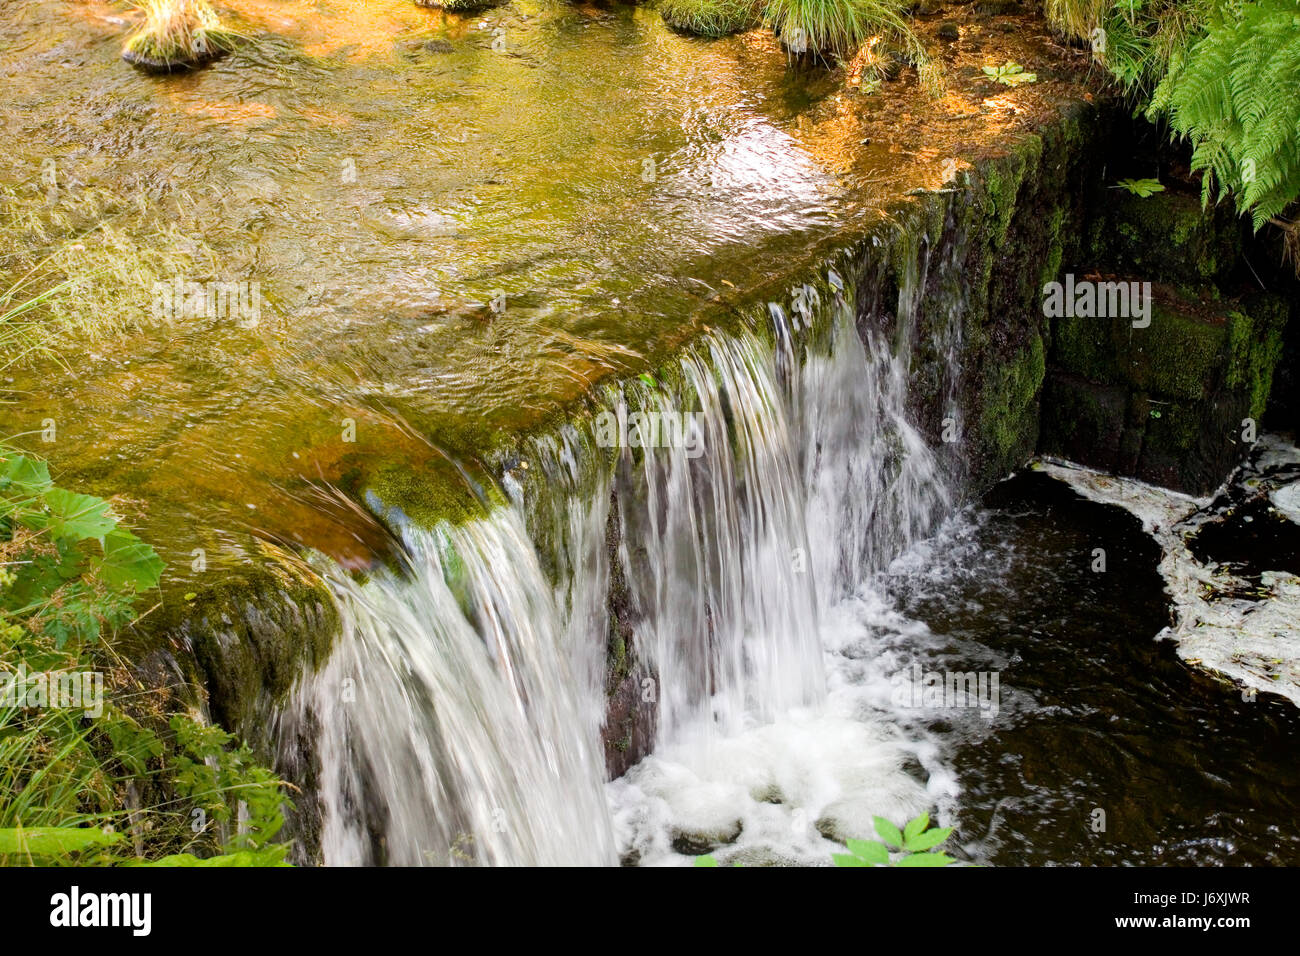 stream waterfall black forest health resort climatic spa forest leaf tree trees Stock Photo